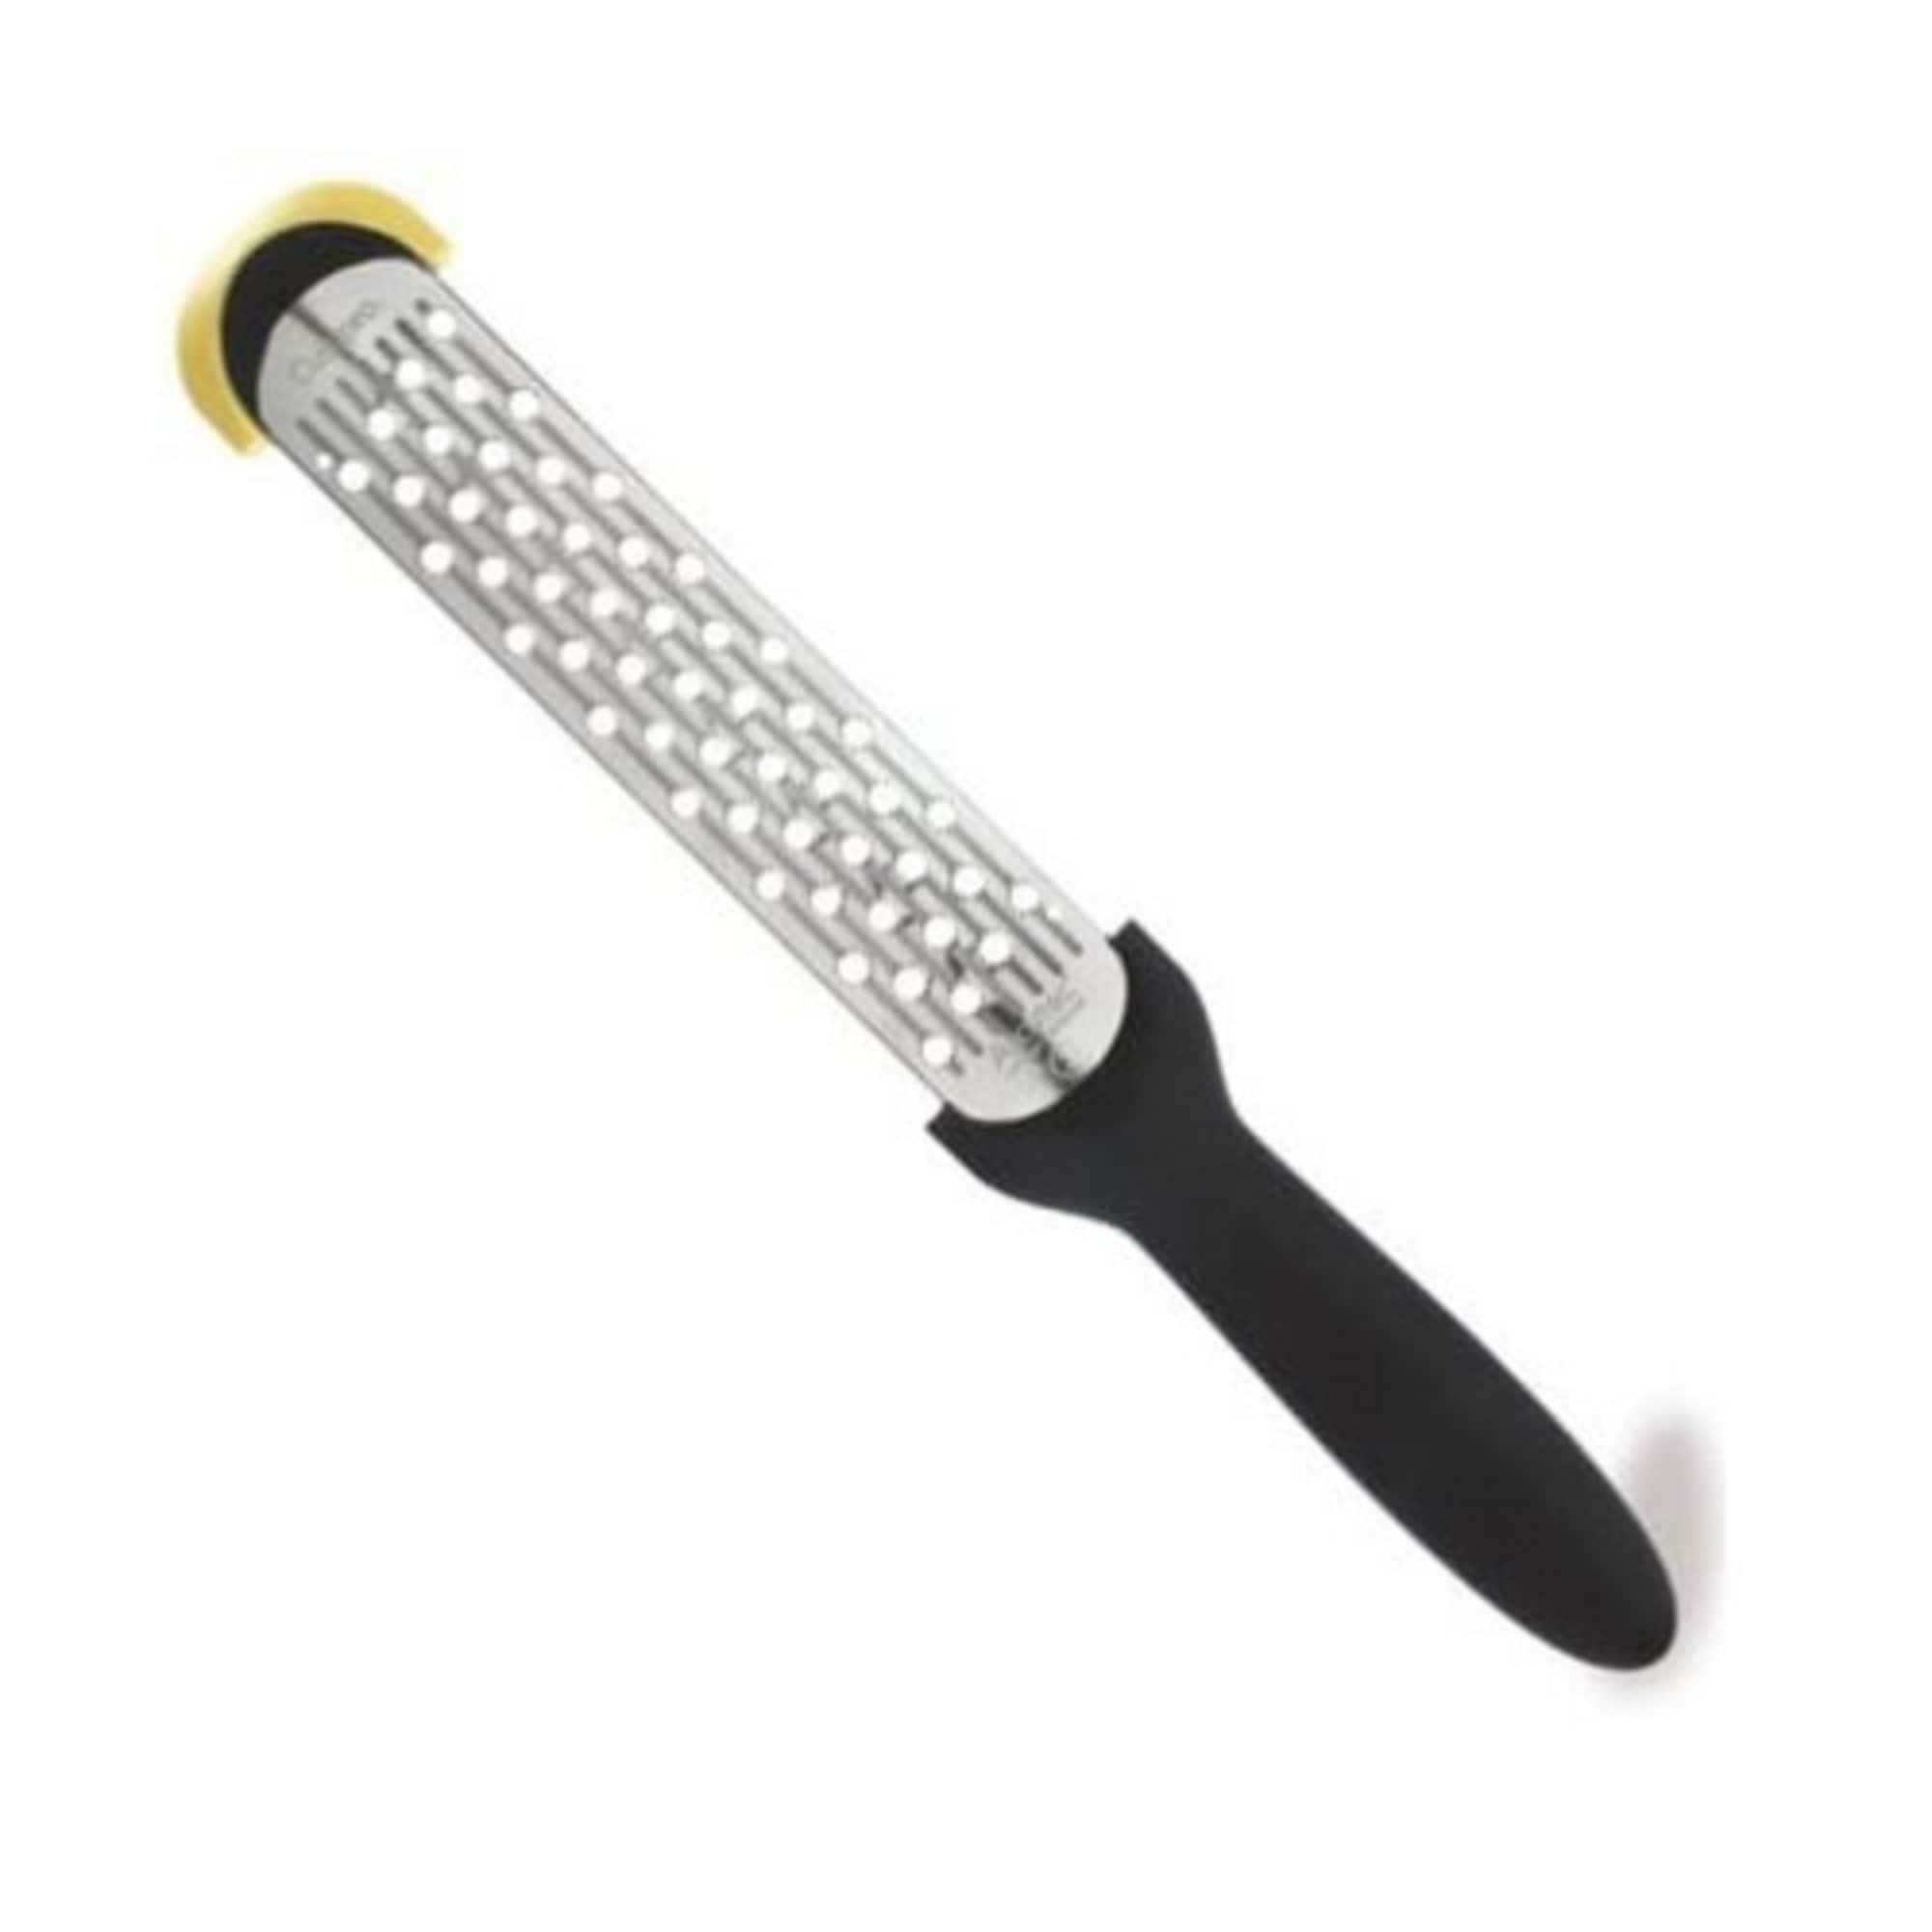 Cuisipro Parmesan Rasp Grater with Surface Glide Technology - Bed